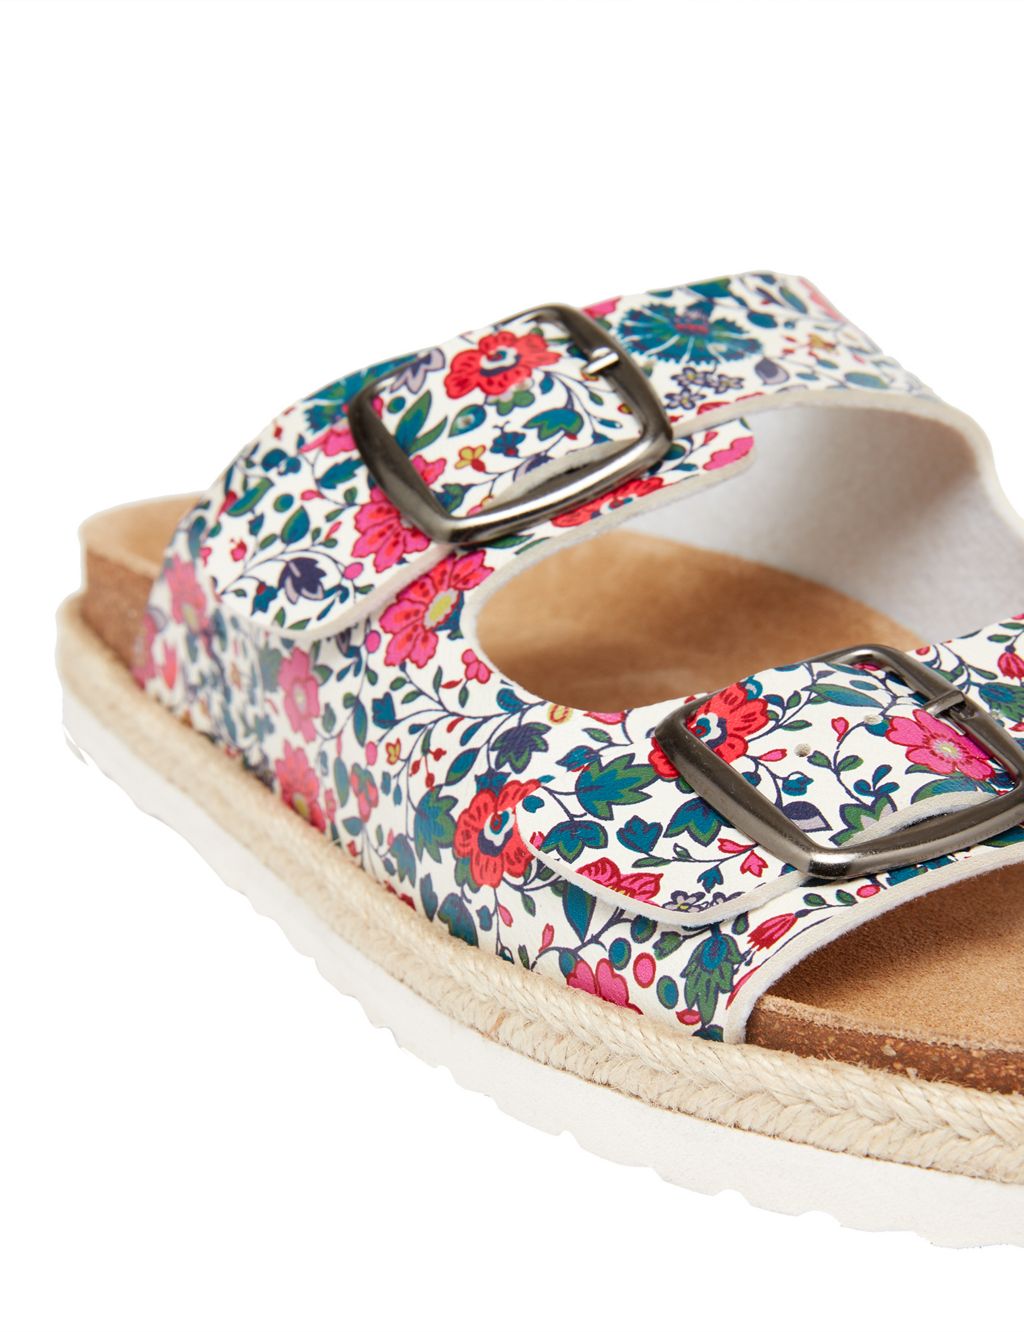 Leather Floral Buckle Footbed Sandals image 3